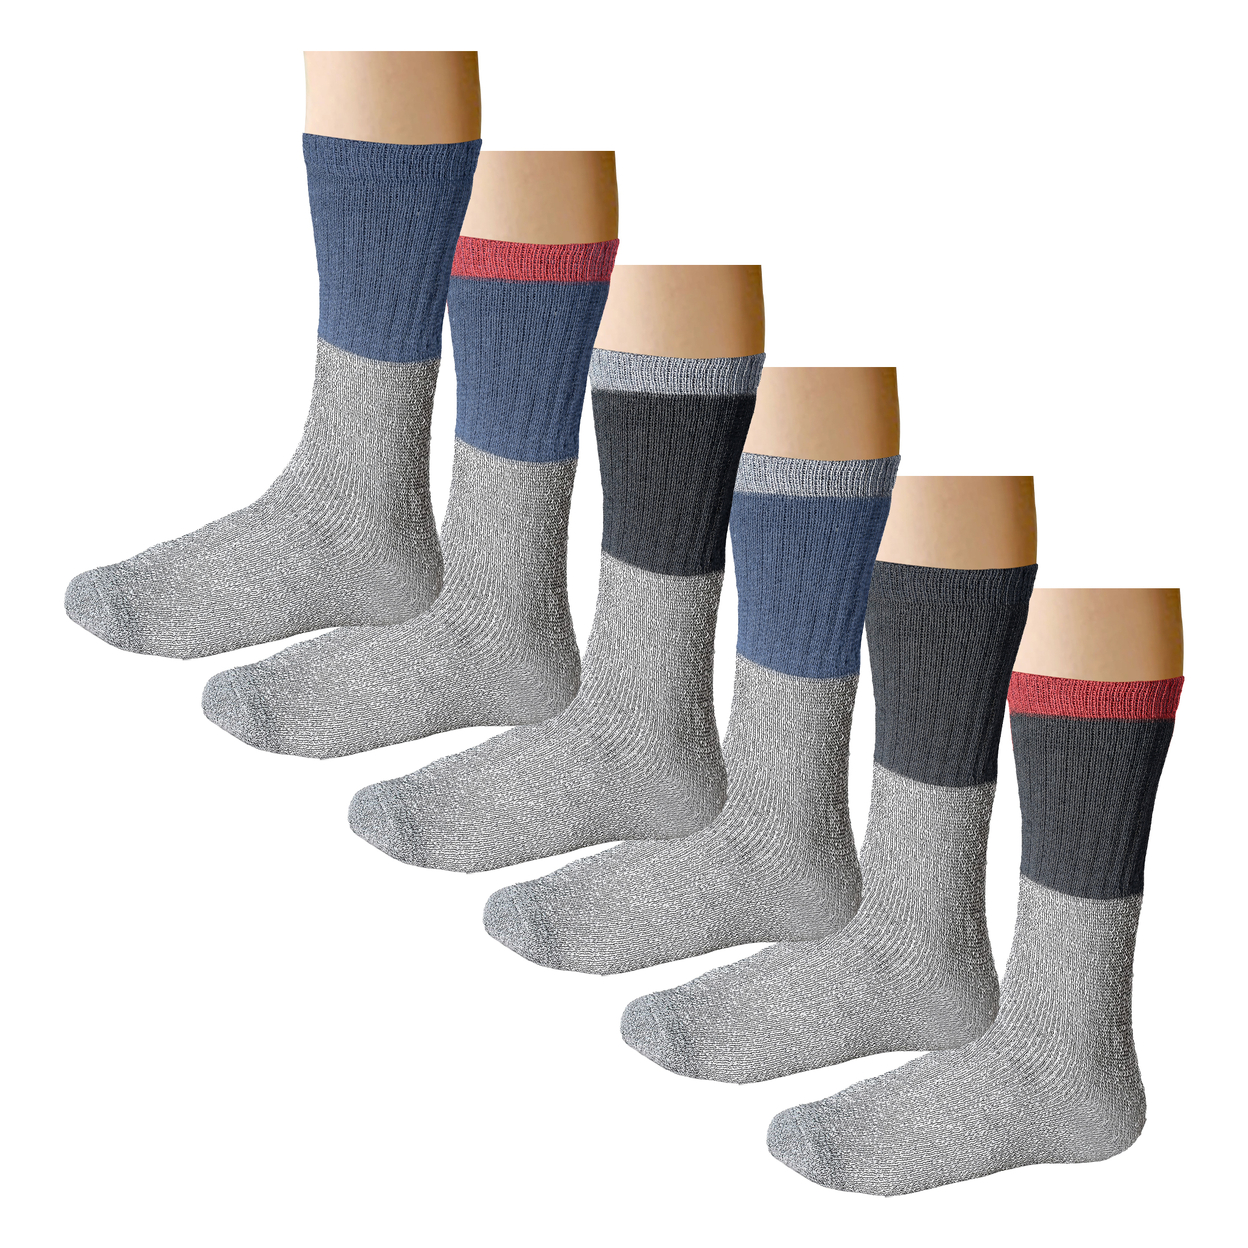 6-Pairs: Women's Winter Warm Thick Heated Cozy Thermal Crew Socks